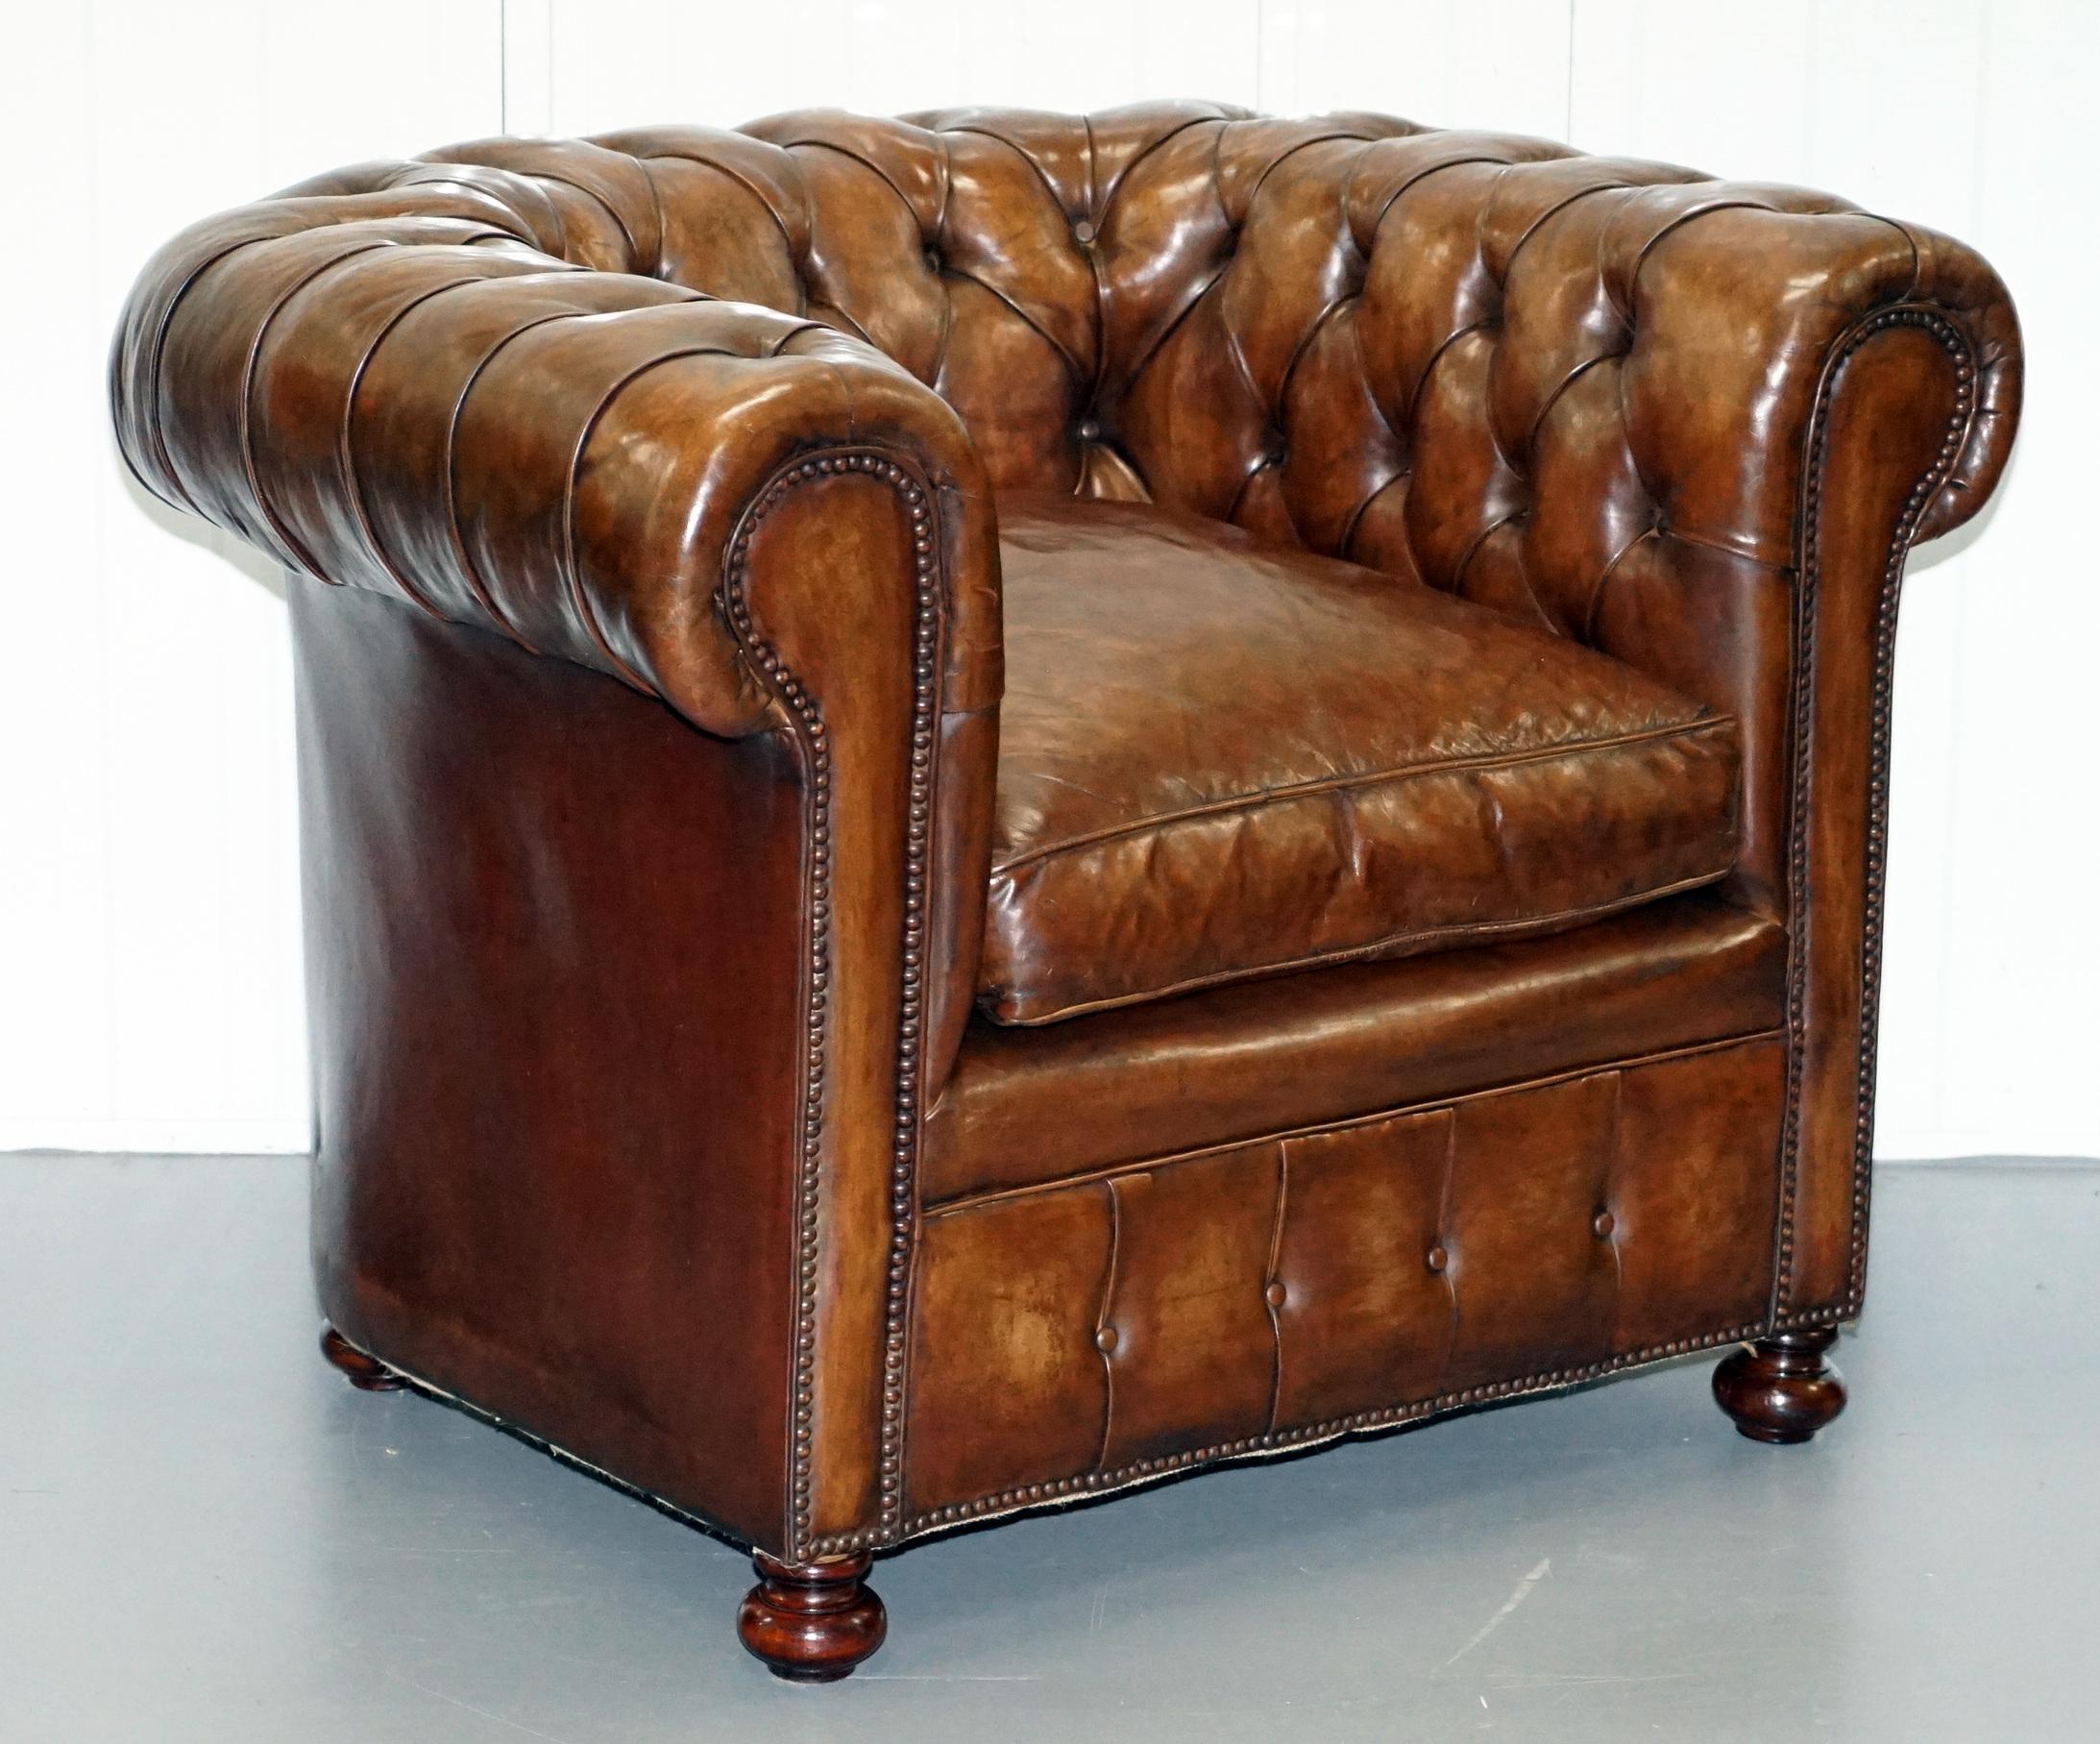 We are delighted to offer for sale this stunning pair of lovely fully restored vintage Chesterfield Club armchairs in cigar brown leather with solid walnut feet 

These chairs are a real tour de force, they have absolutely everything going for